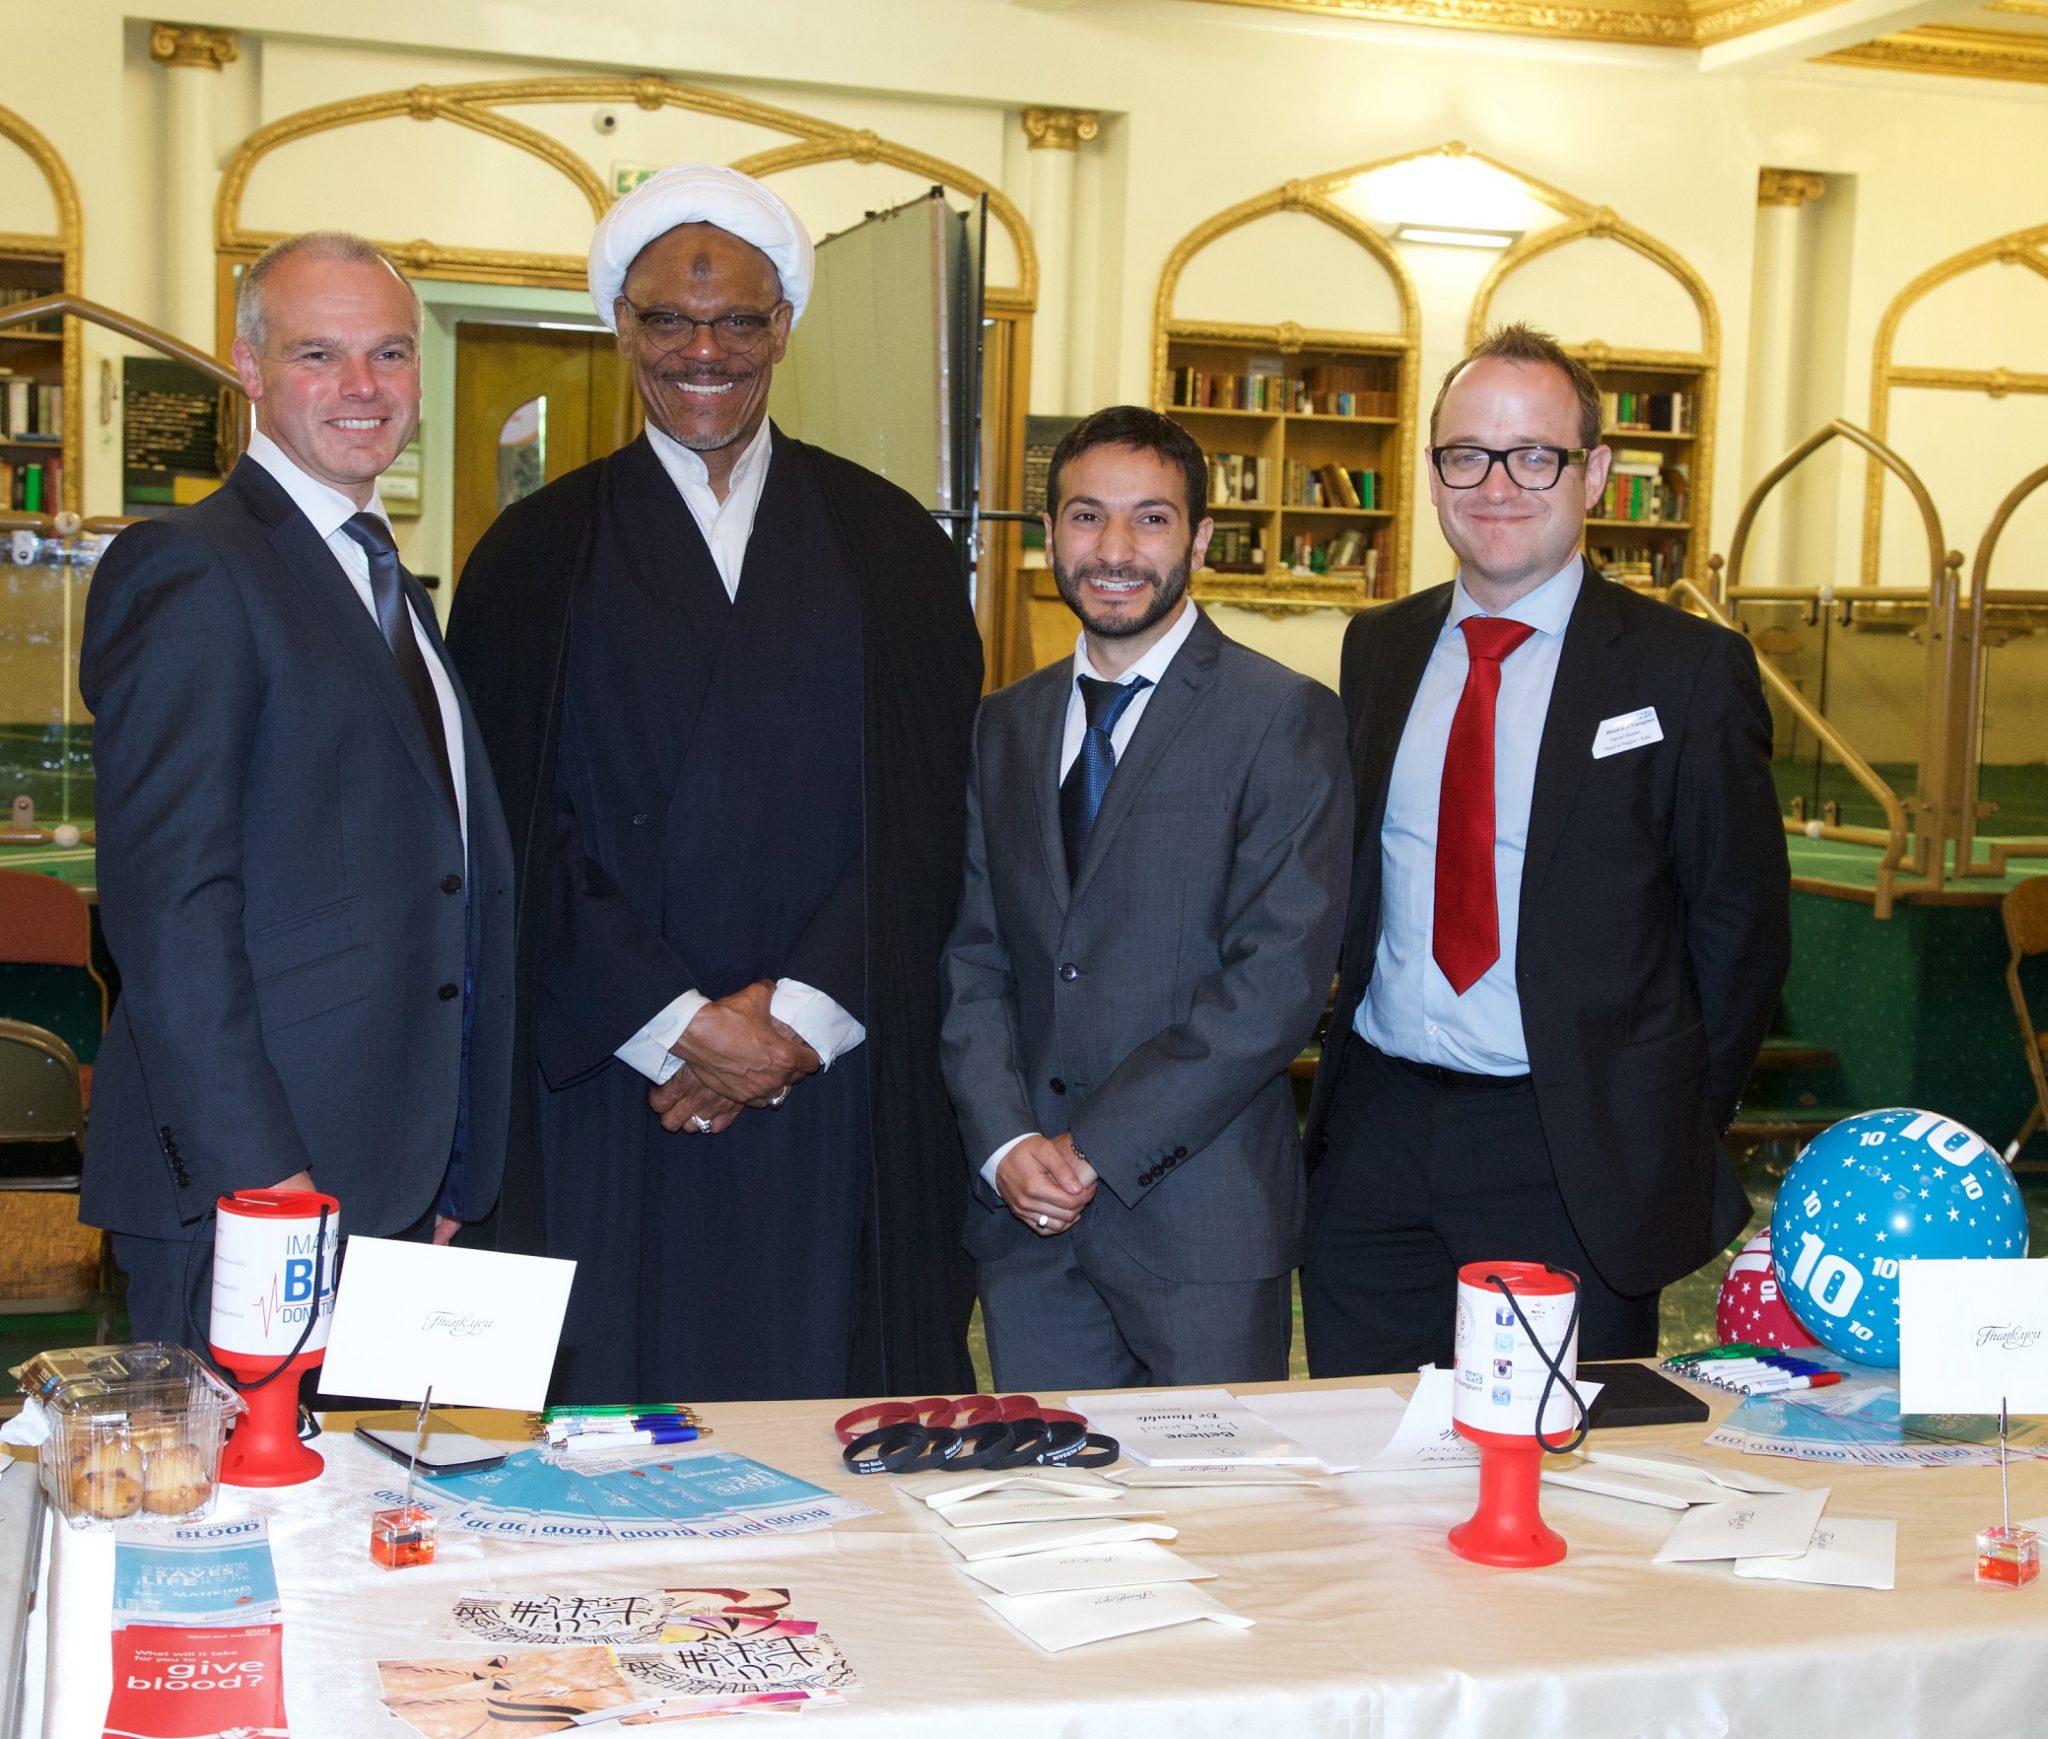 L-R: Mike Stredder, Director of Blood Donation at NHS Blood and Transplant; Sheikh Ahmed Haneef, Islamic Centre of England; Aimen Al Diwani, Coordinator, Imam Hussain Blood Donation Campaign; Darren Bowen, Head of Region at NHS Blood and Transplant